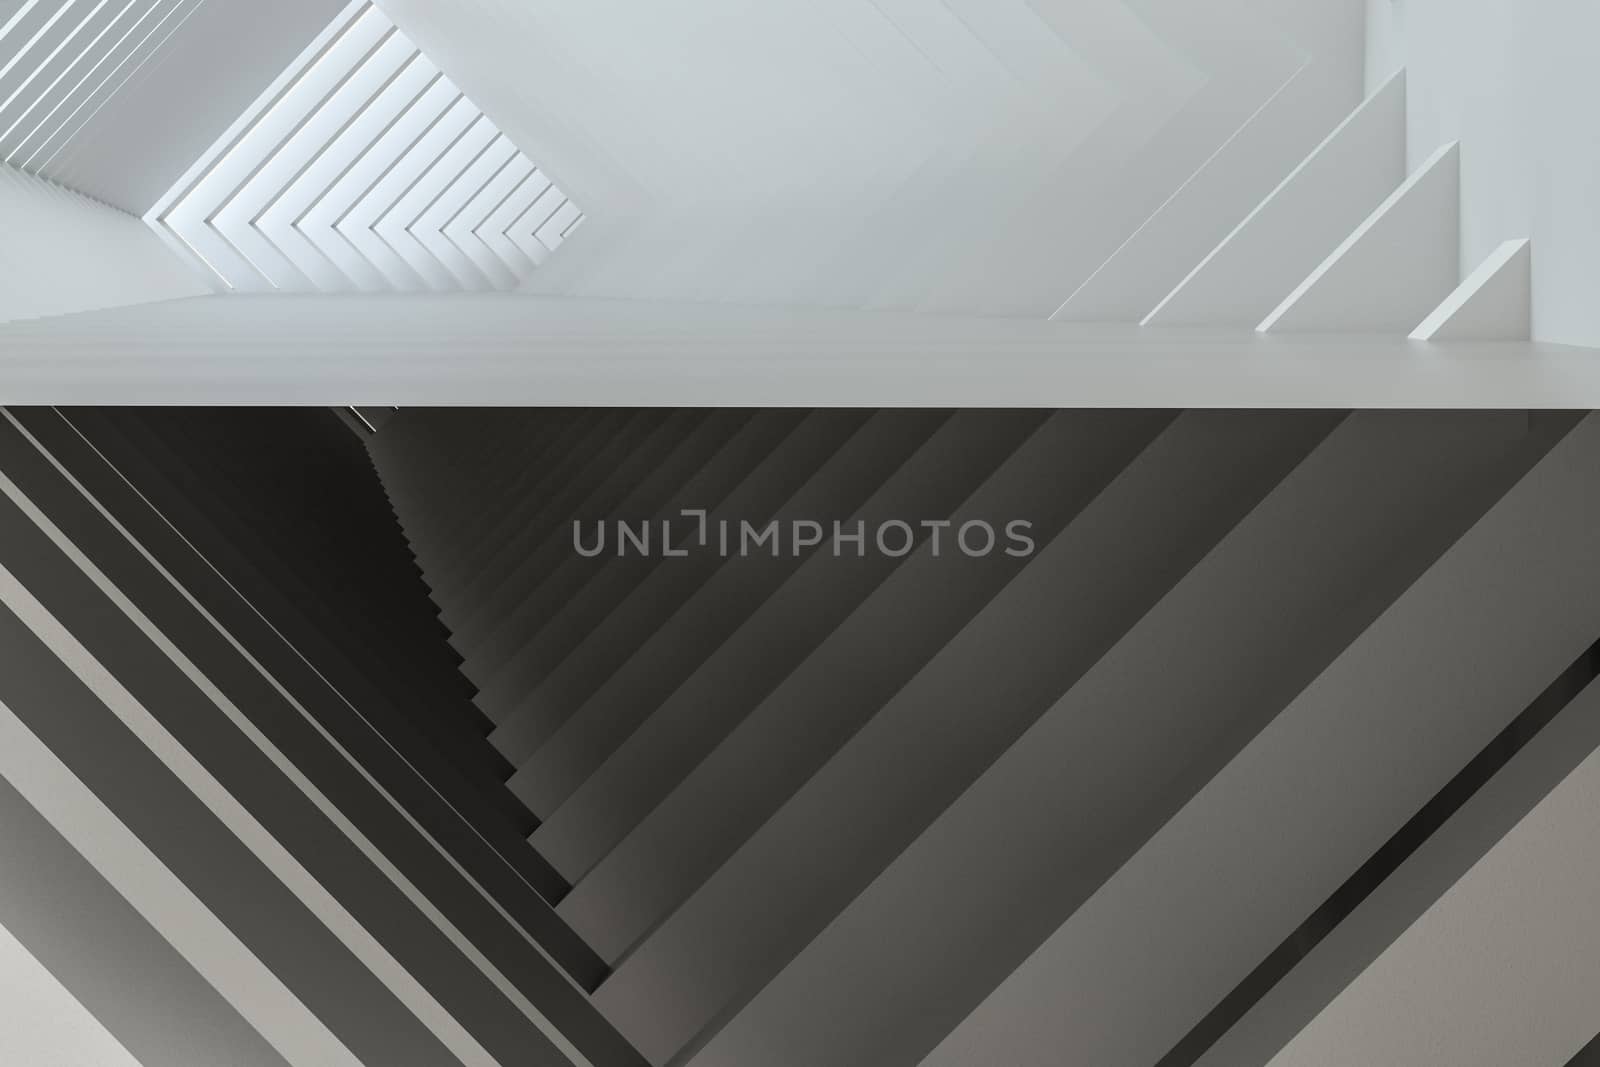 3d rendering, white interior building structure. Computer digital background